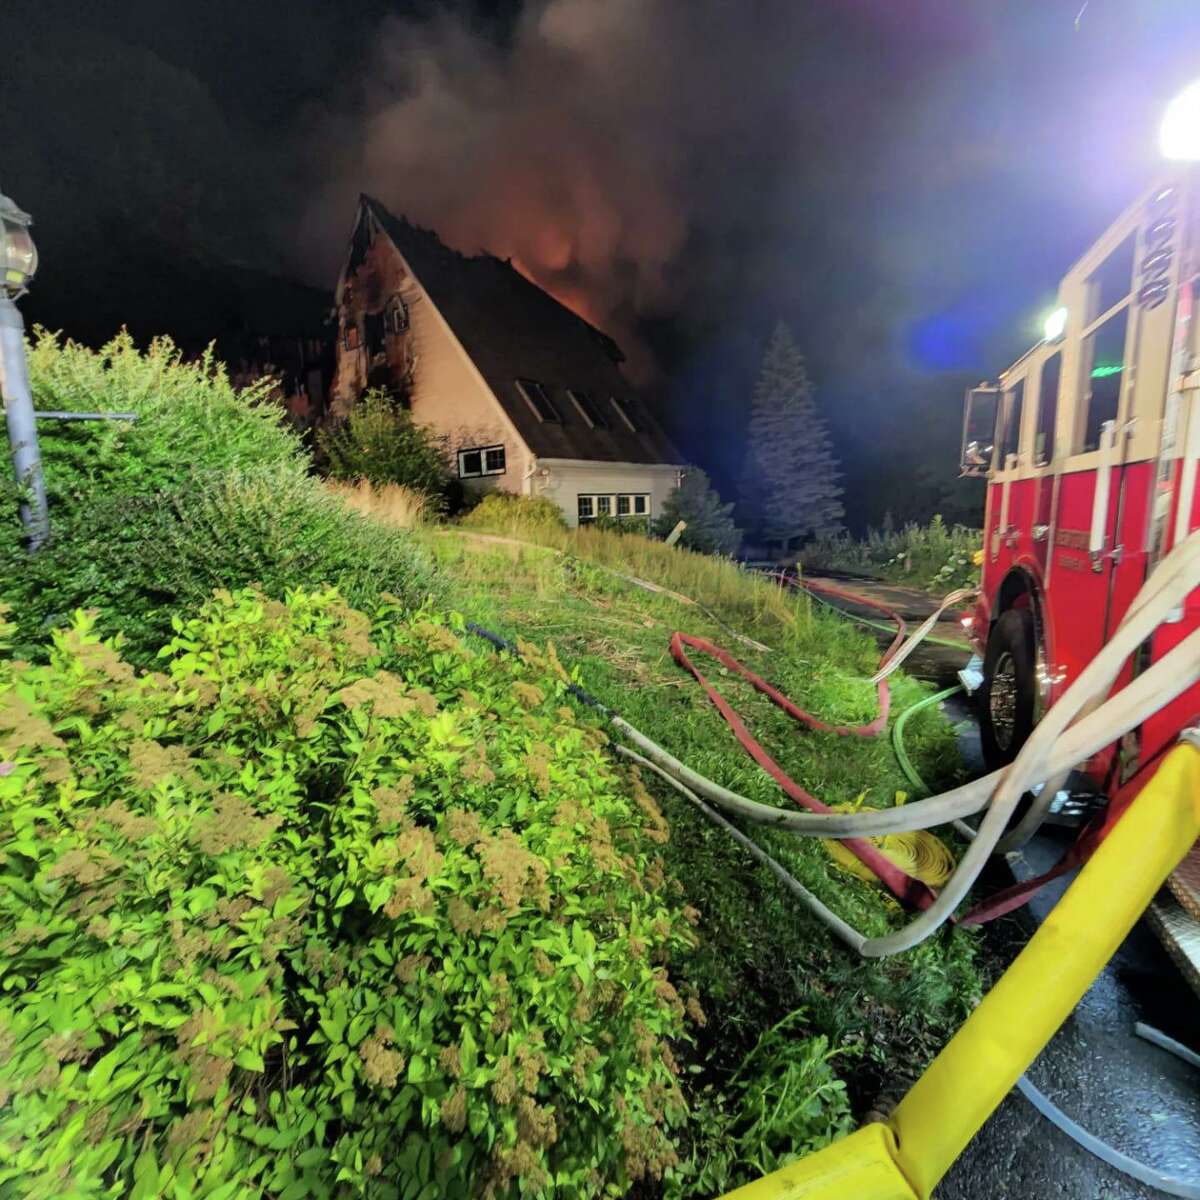 Firefighters responded to a house fire Monday night on Head of Meadow Road in Newtown, Conn.